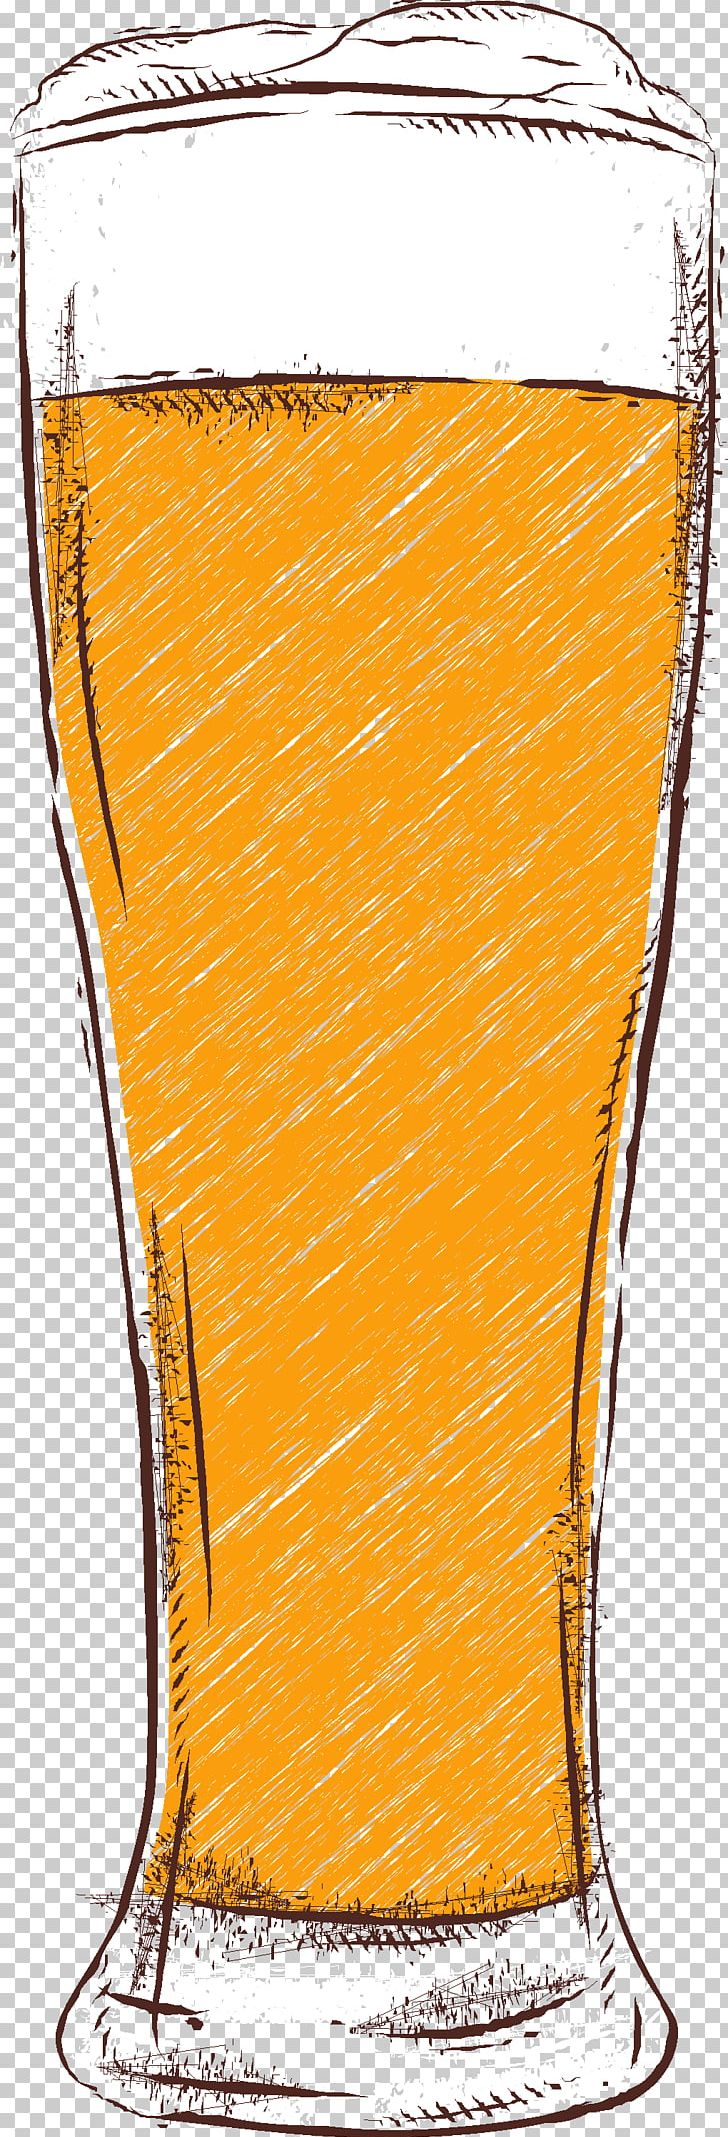 Beer Glasses Pint Glass PNG, Clipart, Beer Glass, Beer Glasses, Brew, Drinkware, Glass Free PNG Download